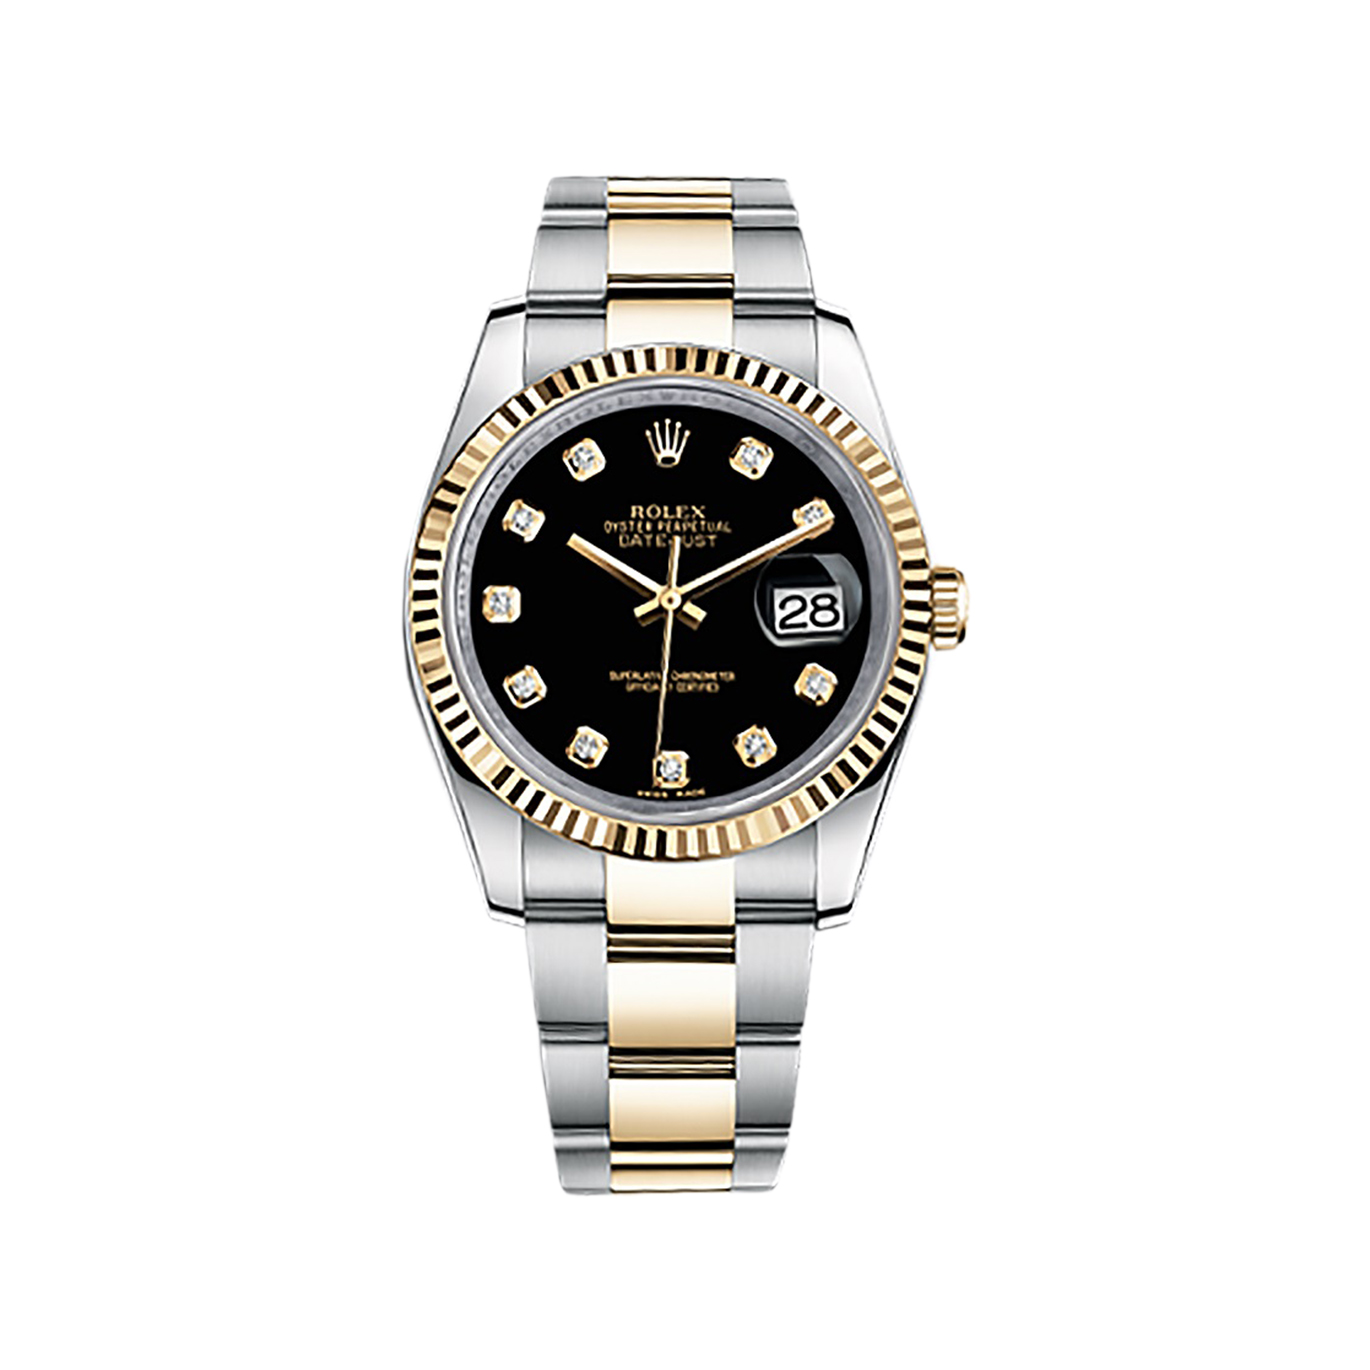 Datejust 36 116233 Gold & Stainless Steel Watch (Black Set with Diamonds)